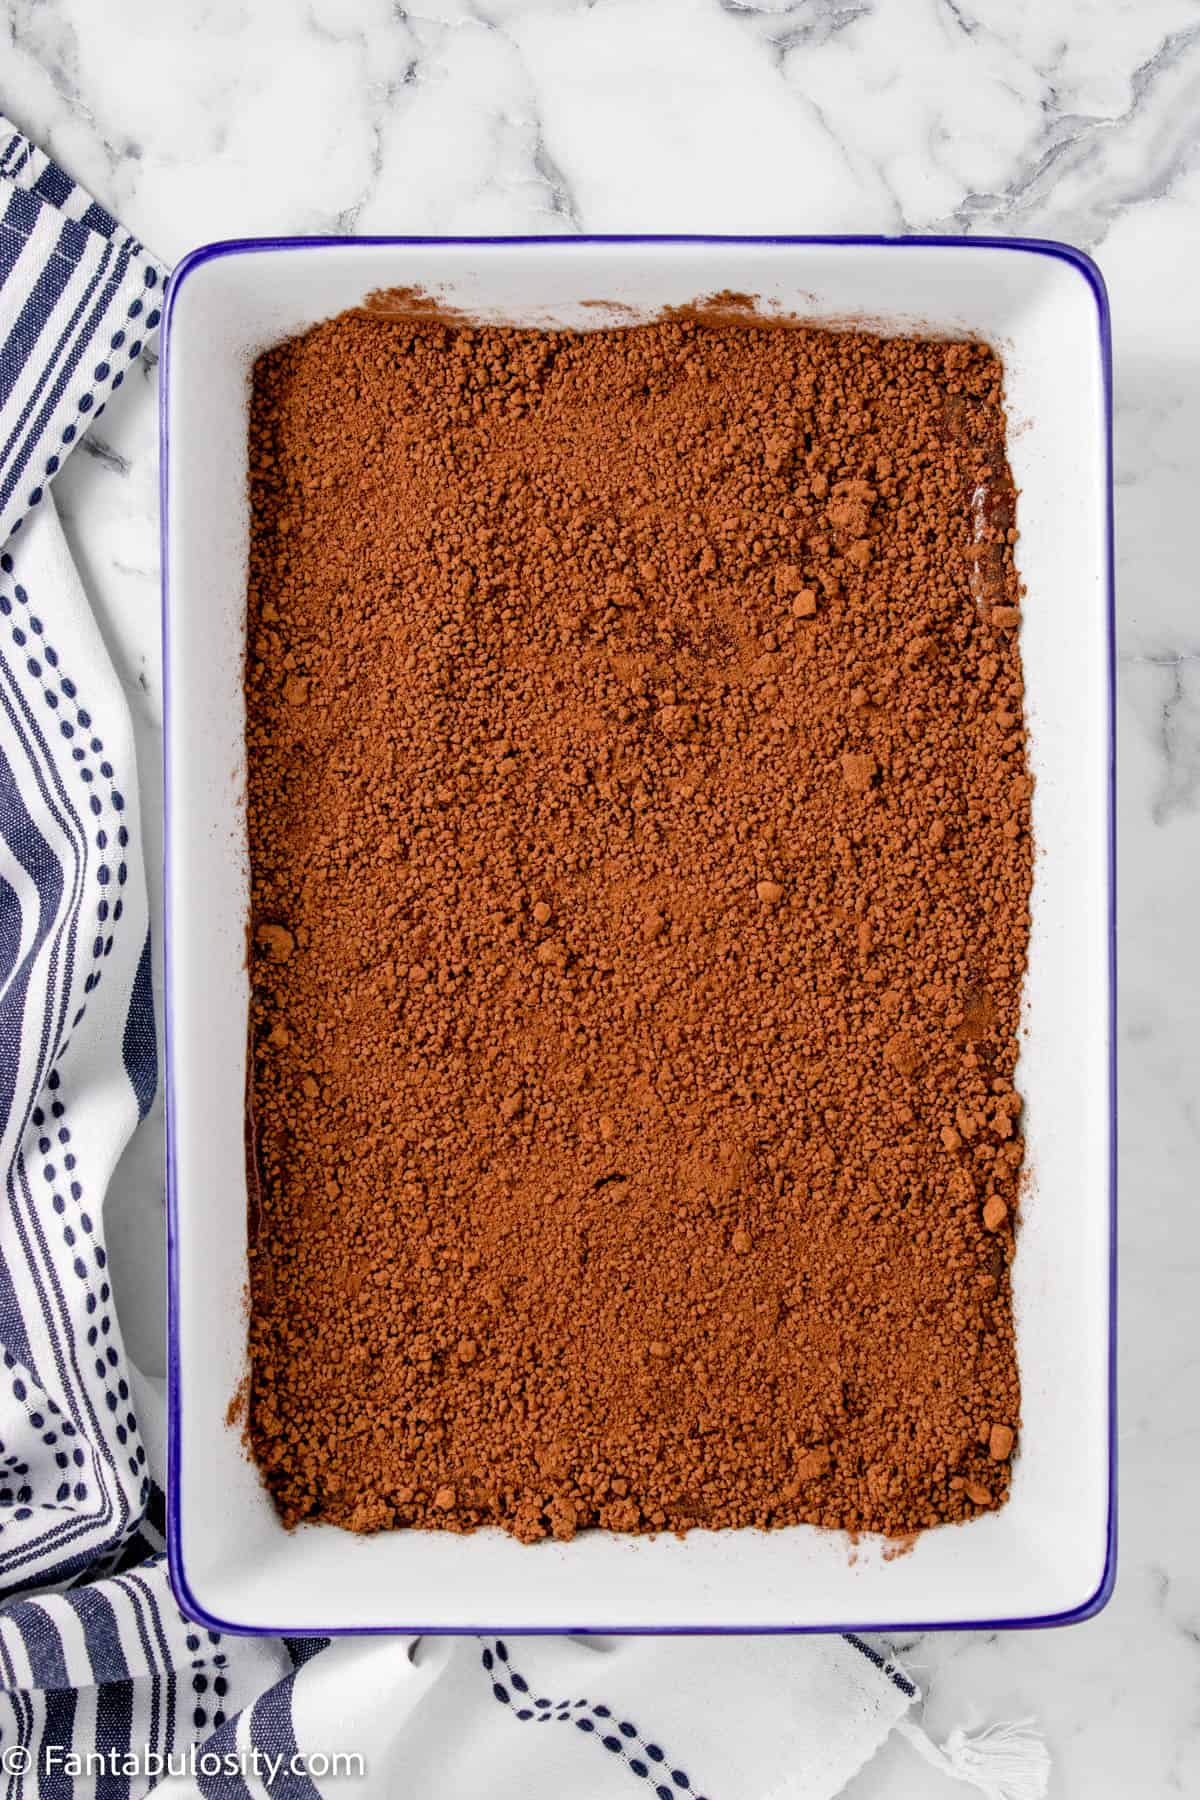 Brown sugar and cocoa mixture spread out over cake batter in the rectangle baking dish.